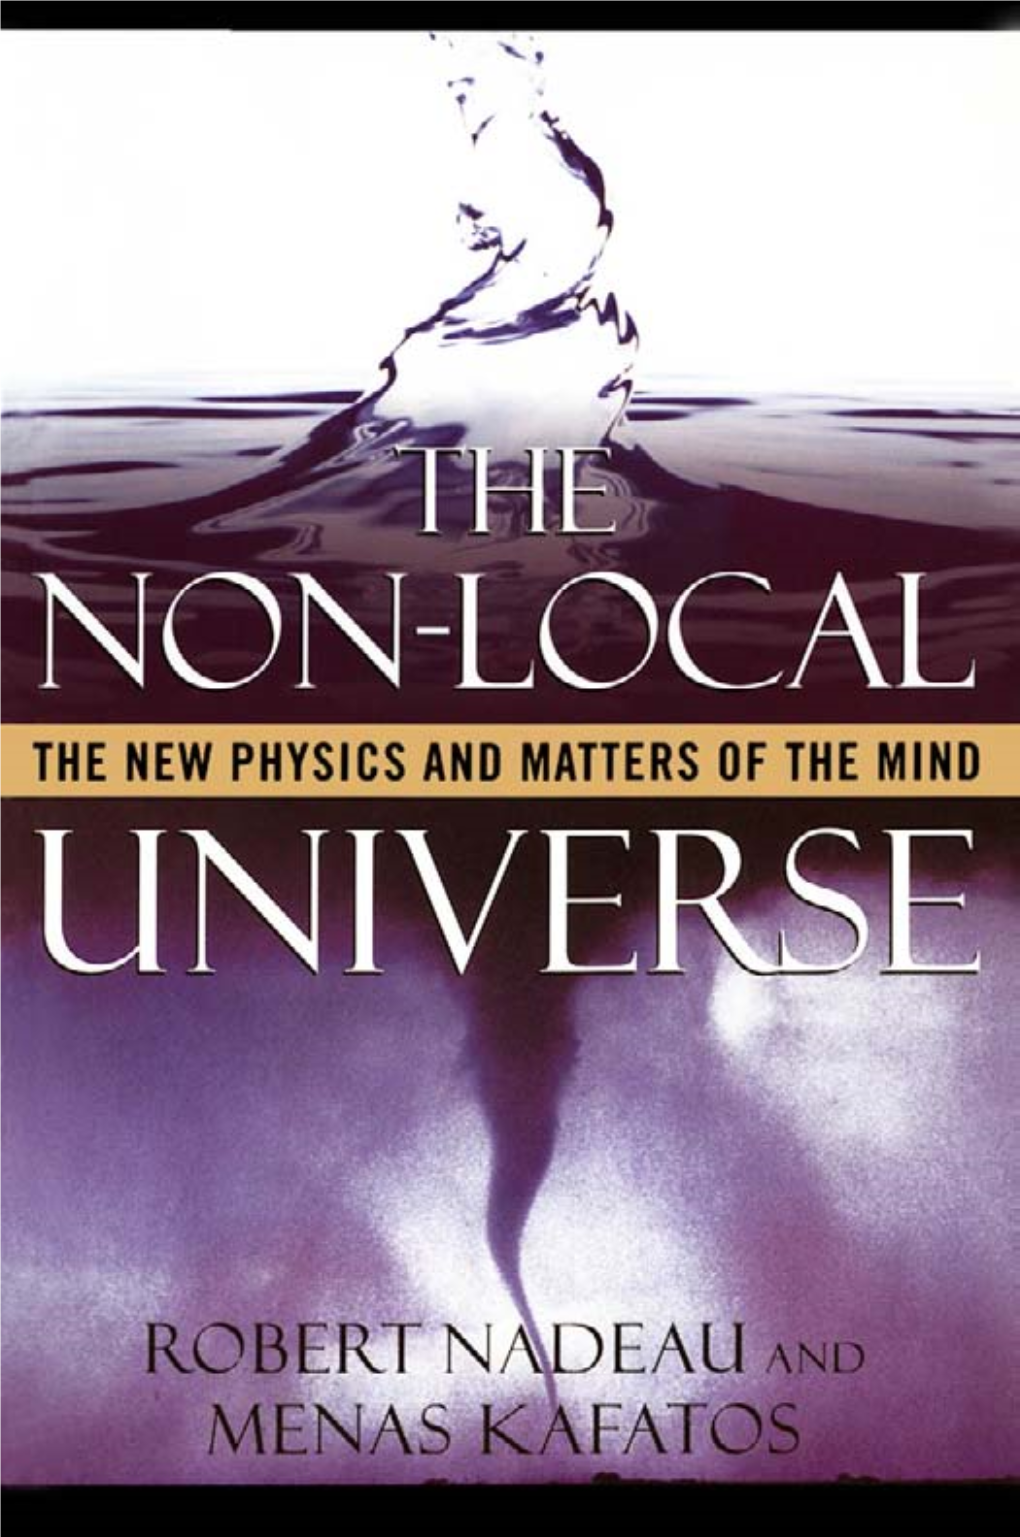 The Non-Local Universe: the New Physics and Matters of the Mind / by Robert Nadeau and Menas Kafatos